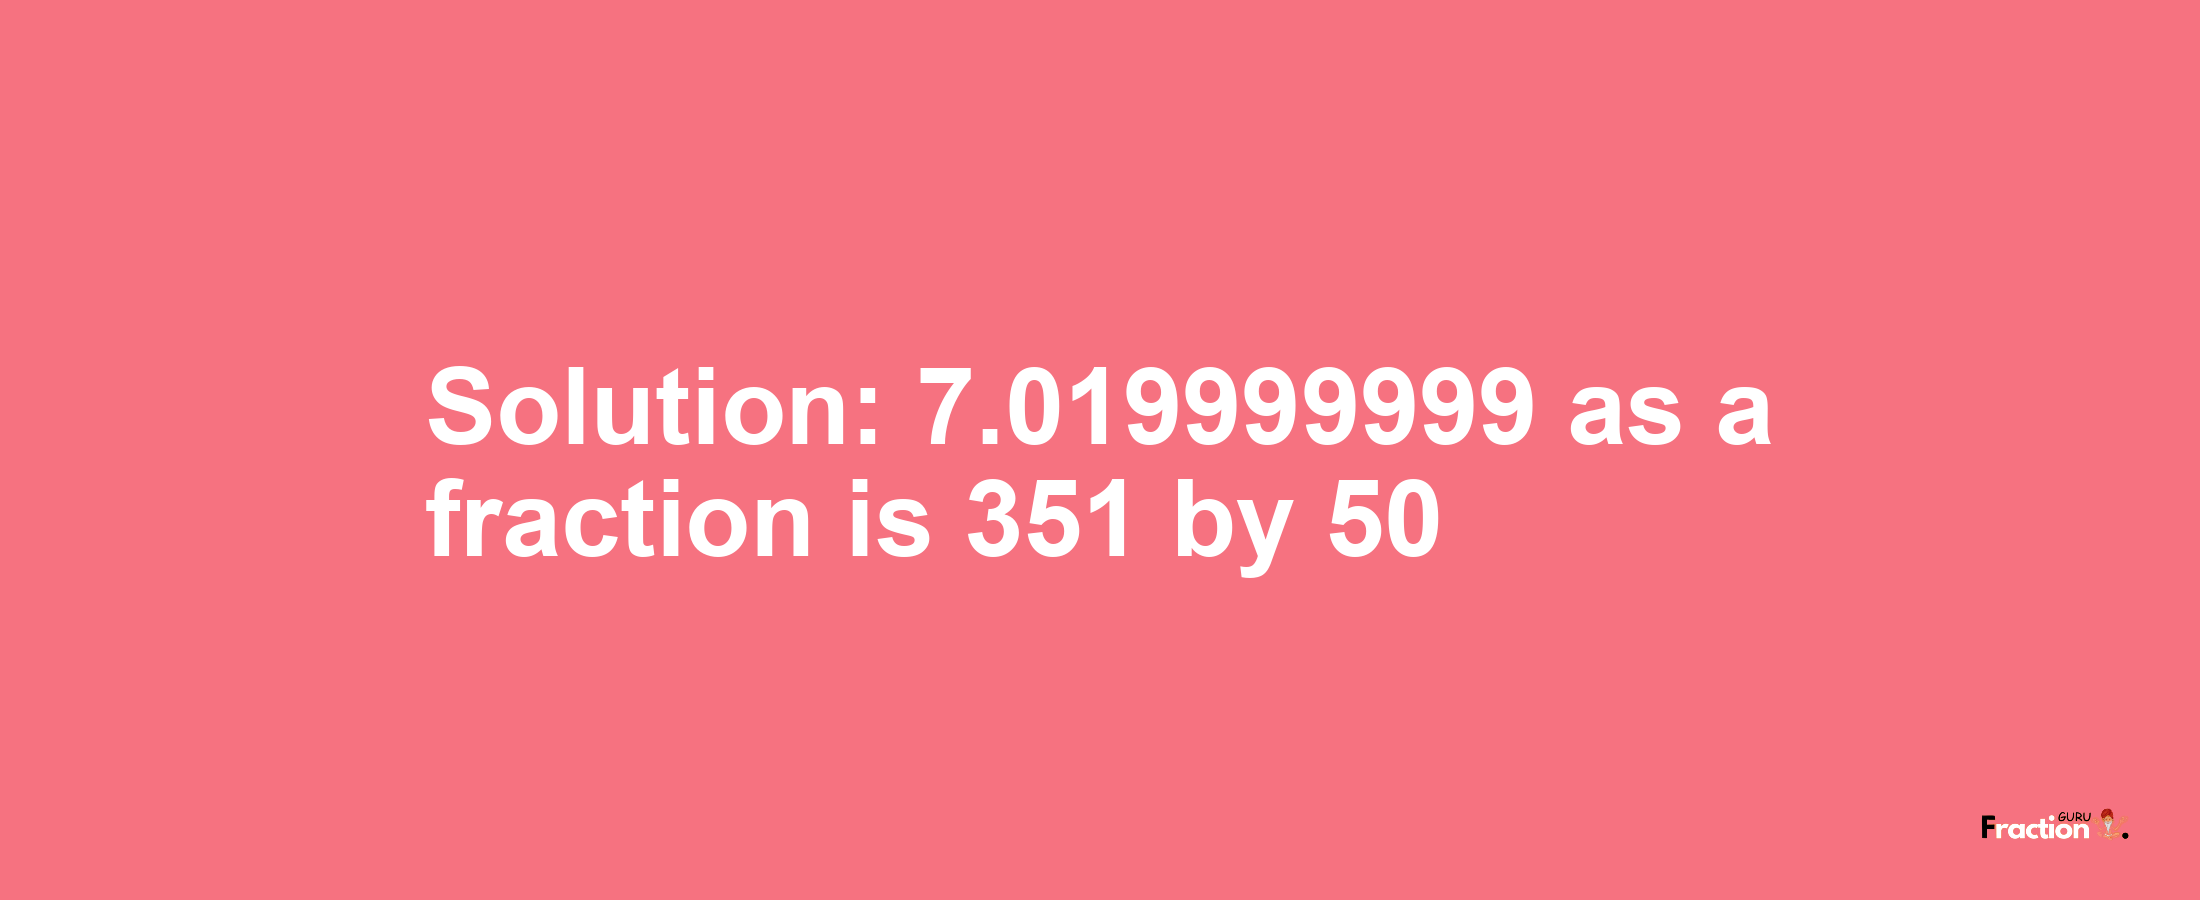 Solution:7.019999999 as a fraction is 351/50